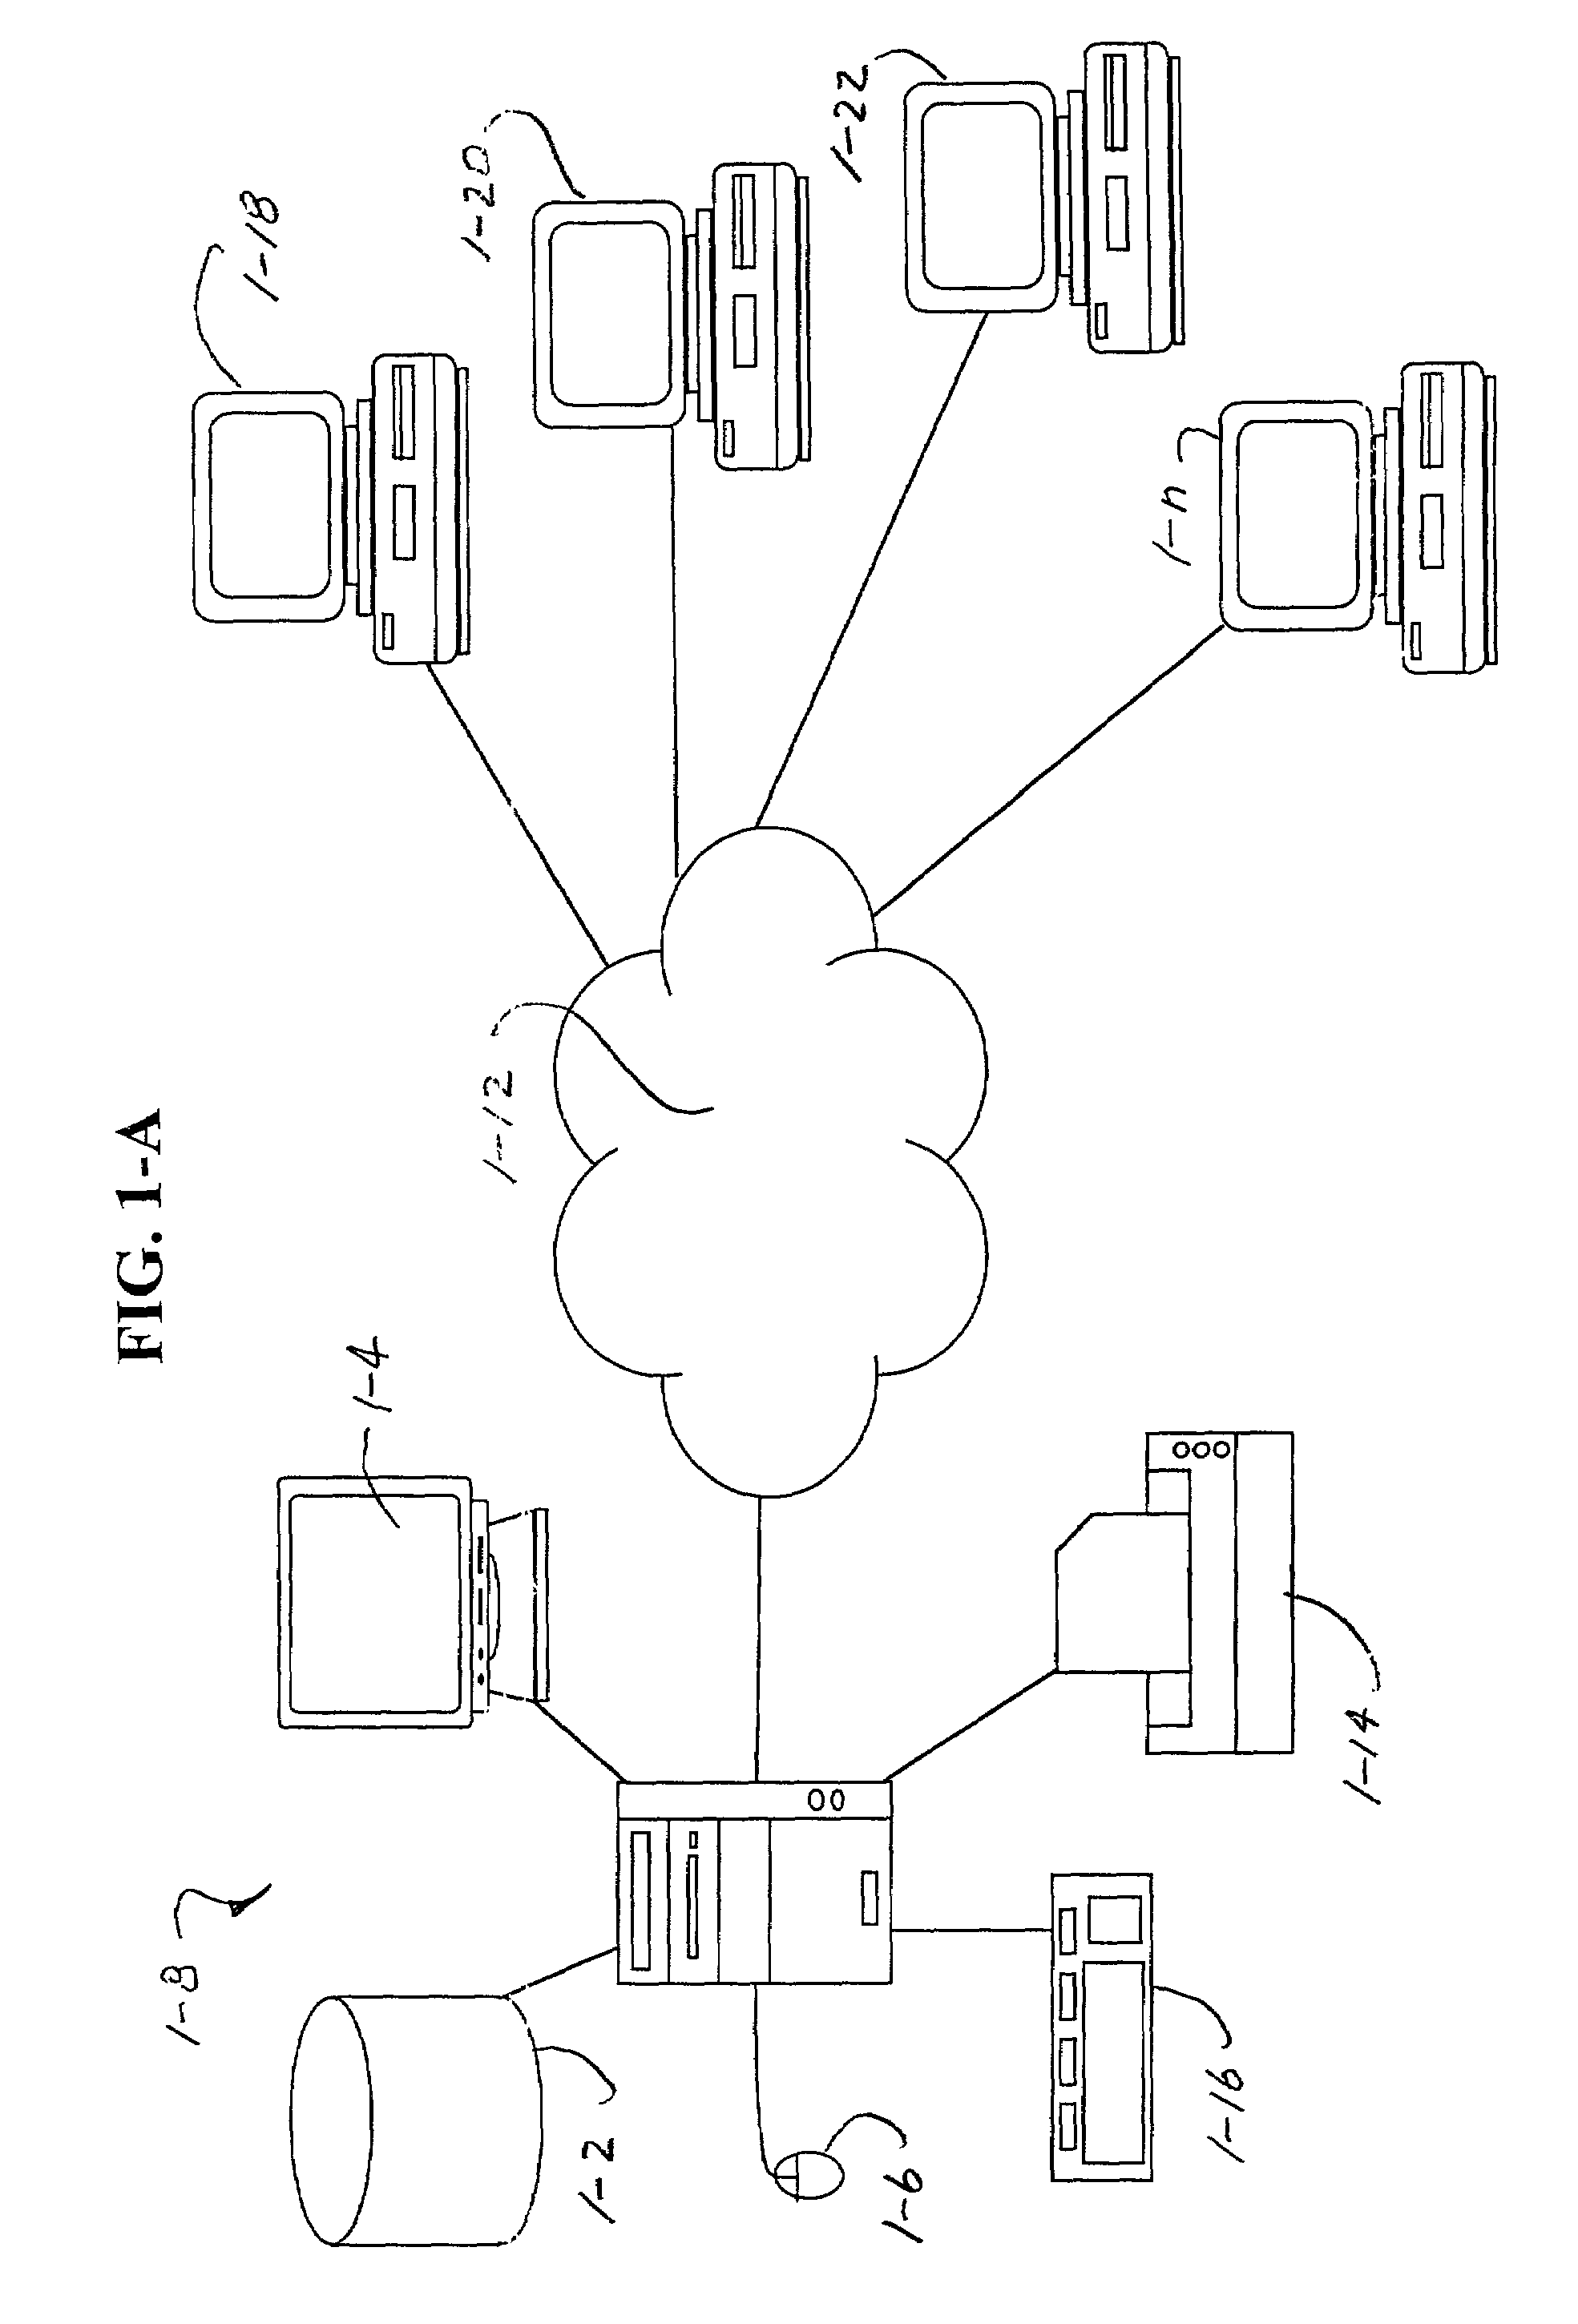 System for creating and maintaining a database of information utilizing user opinions